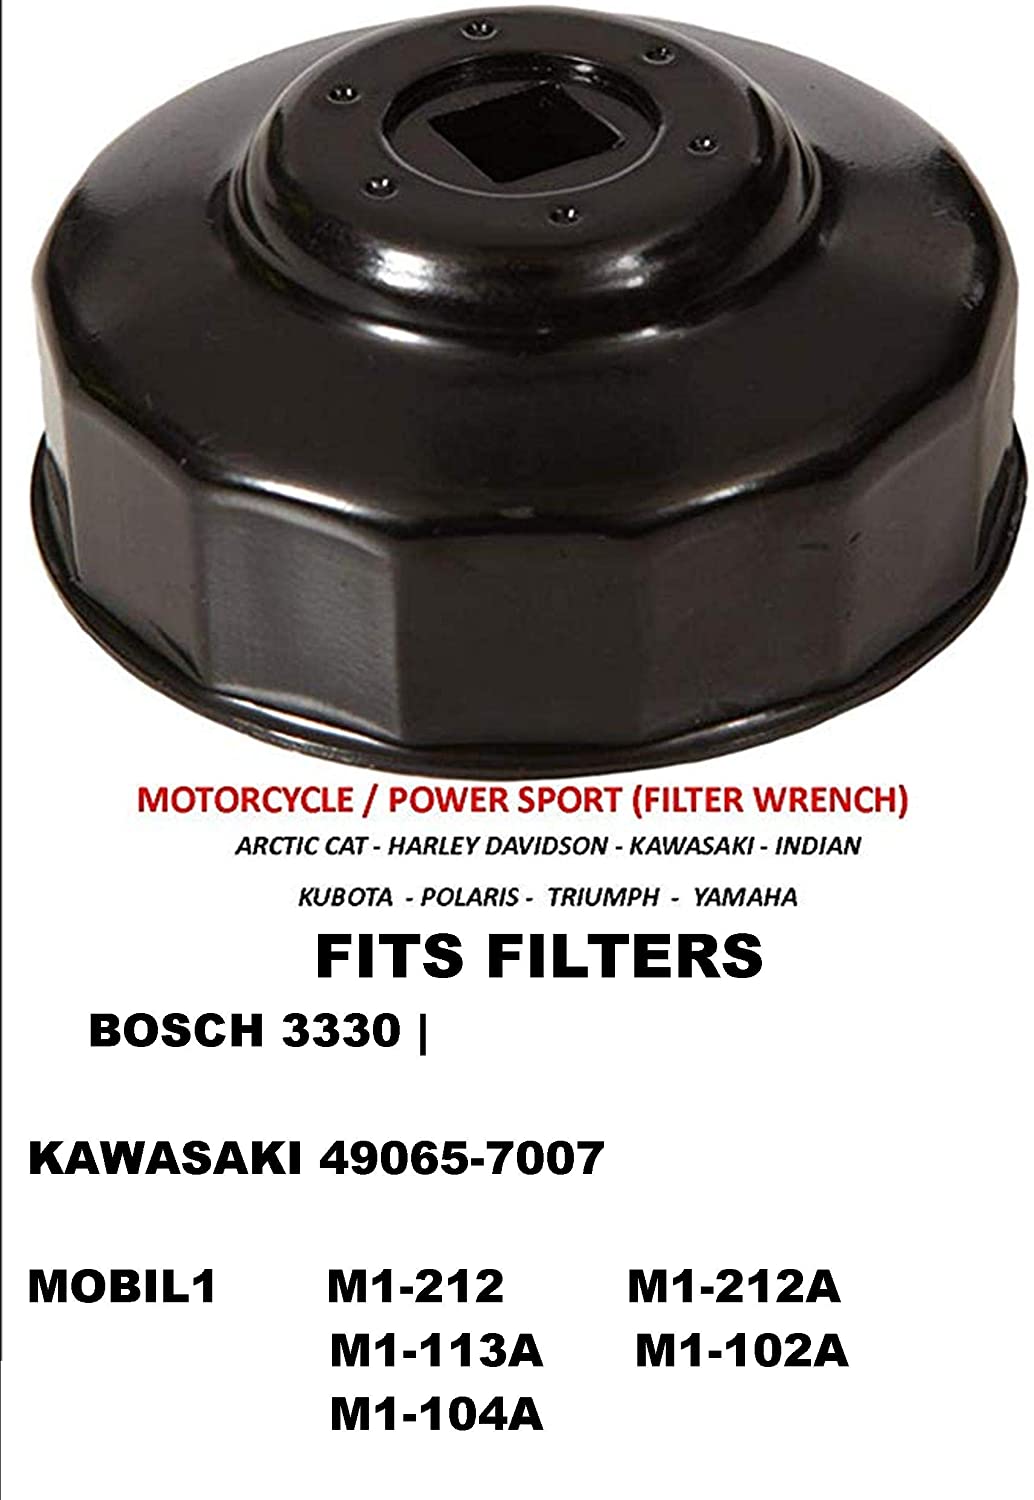 APSG Oil Filter Wrench | Motorcycle/Powersports/car | Fit: Filters Bosch 3330 | Kawasaki 49065-7007 | Mobil 1 M1-212, M1-212A, M1-113A, M1-102A, M1-104A